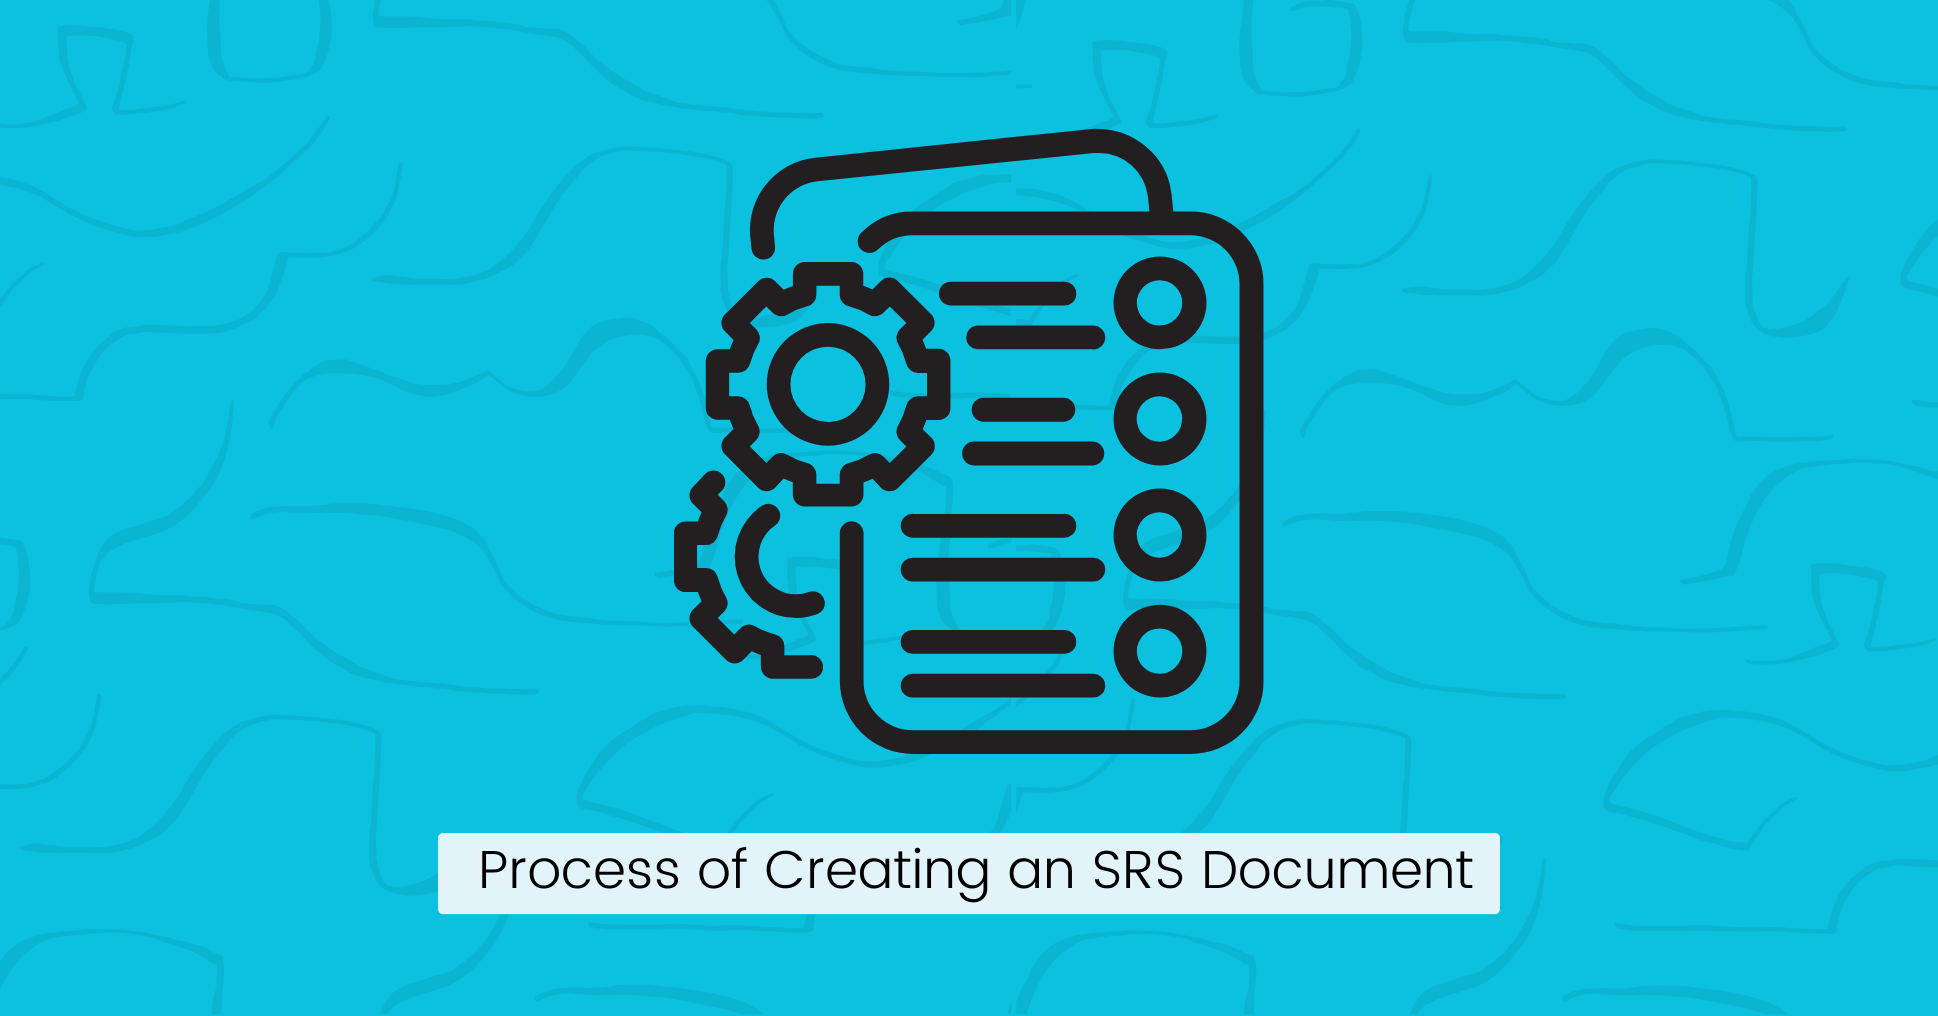 Process of Creating an SRS Document